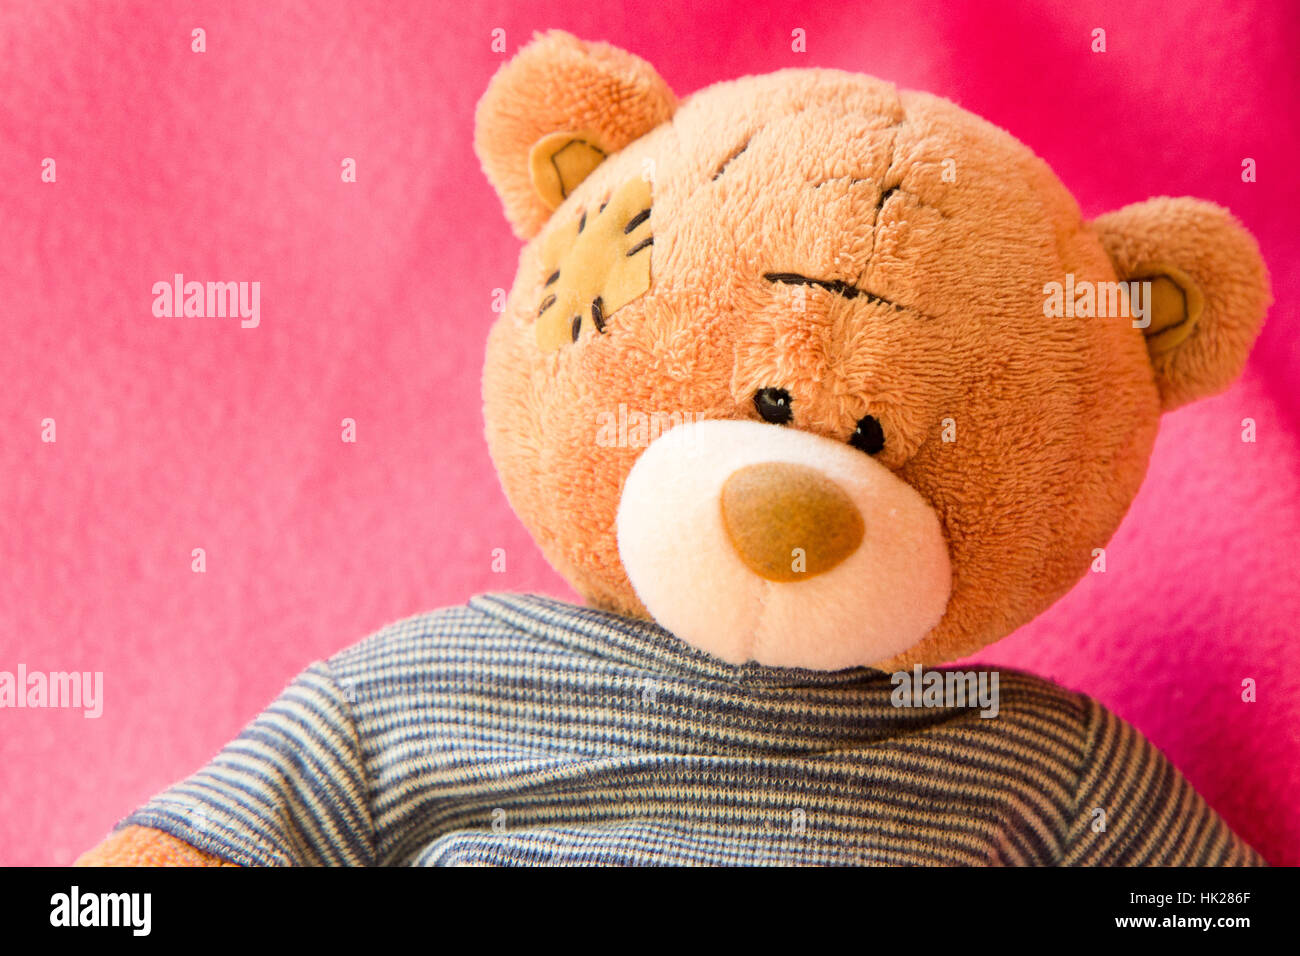 A cute 'me to you' teddy bear on a pink background. Stock Photo